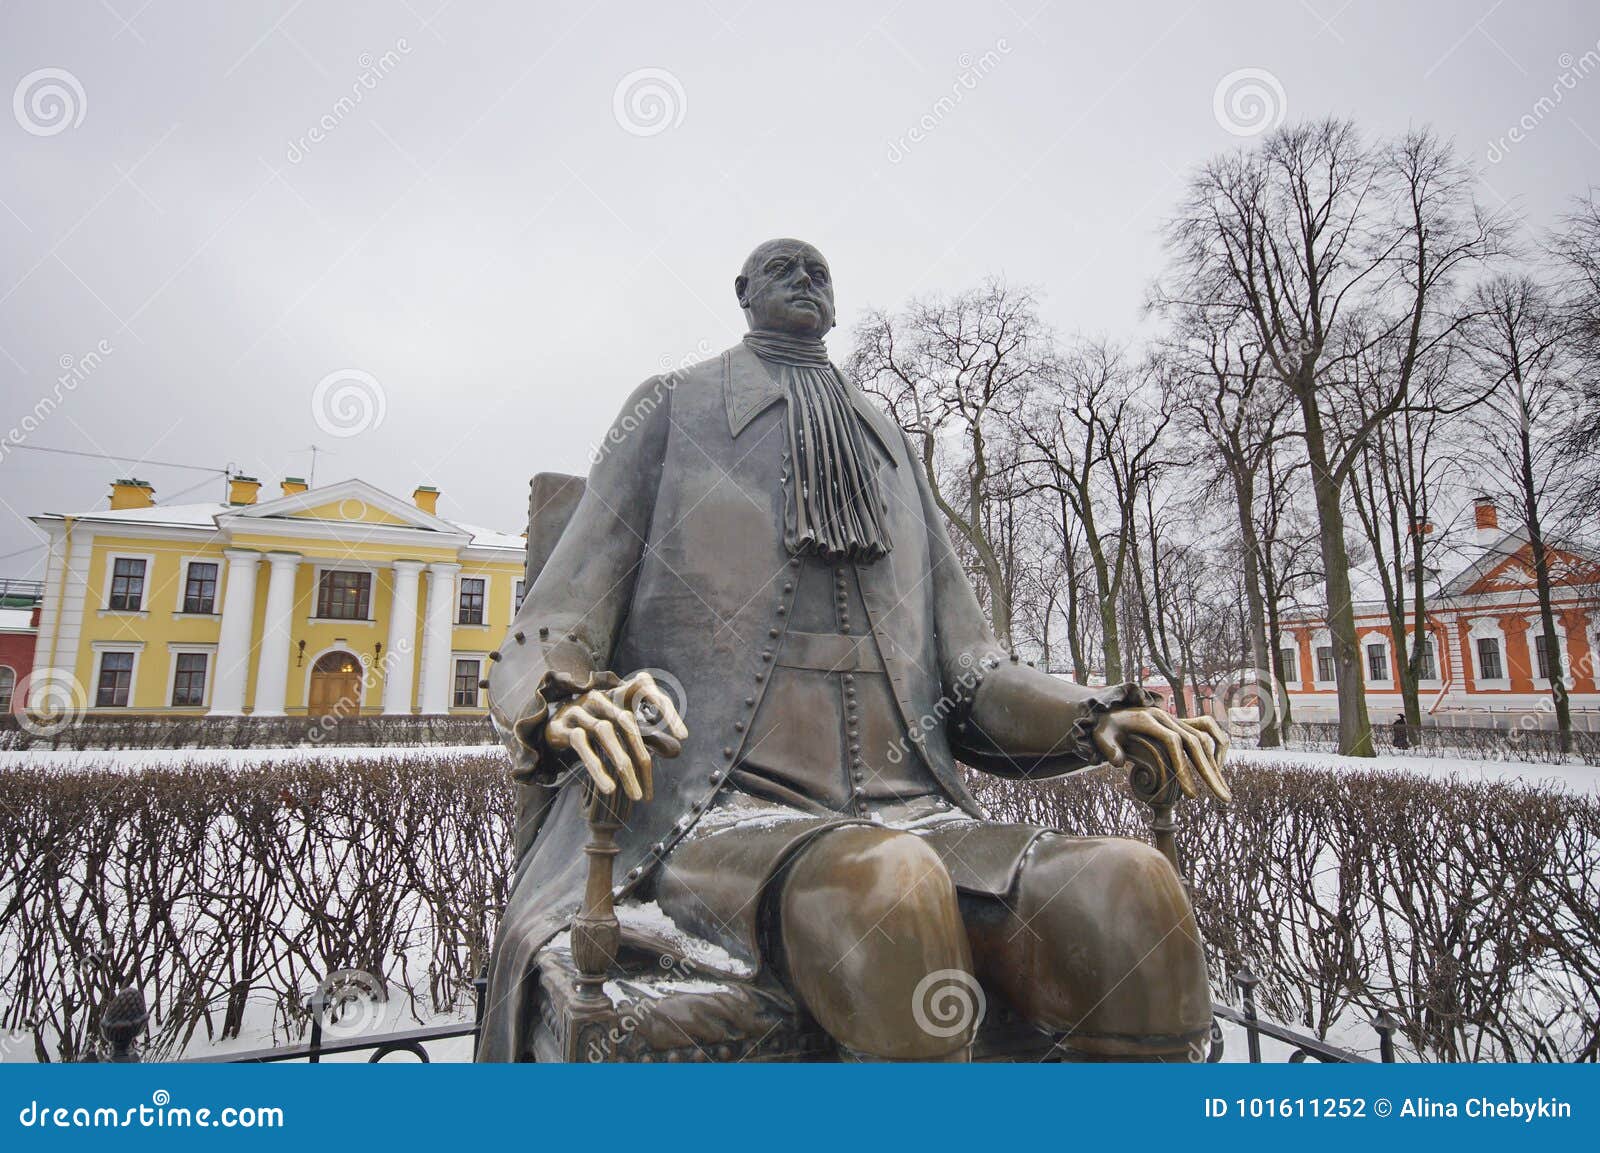 A statue of Peter the Great in St. Petersburg